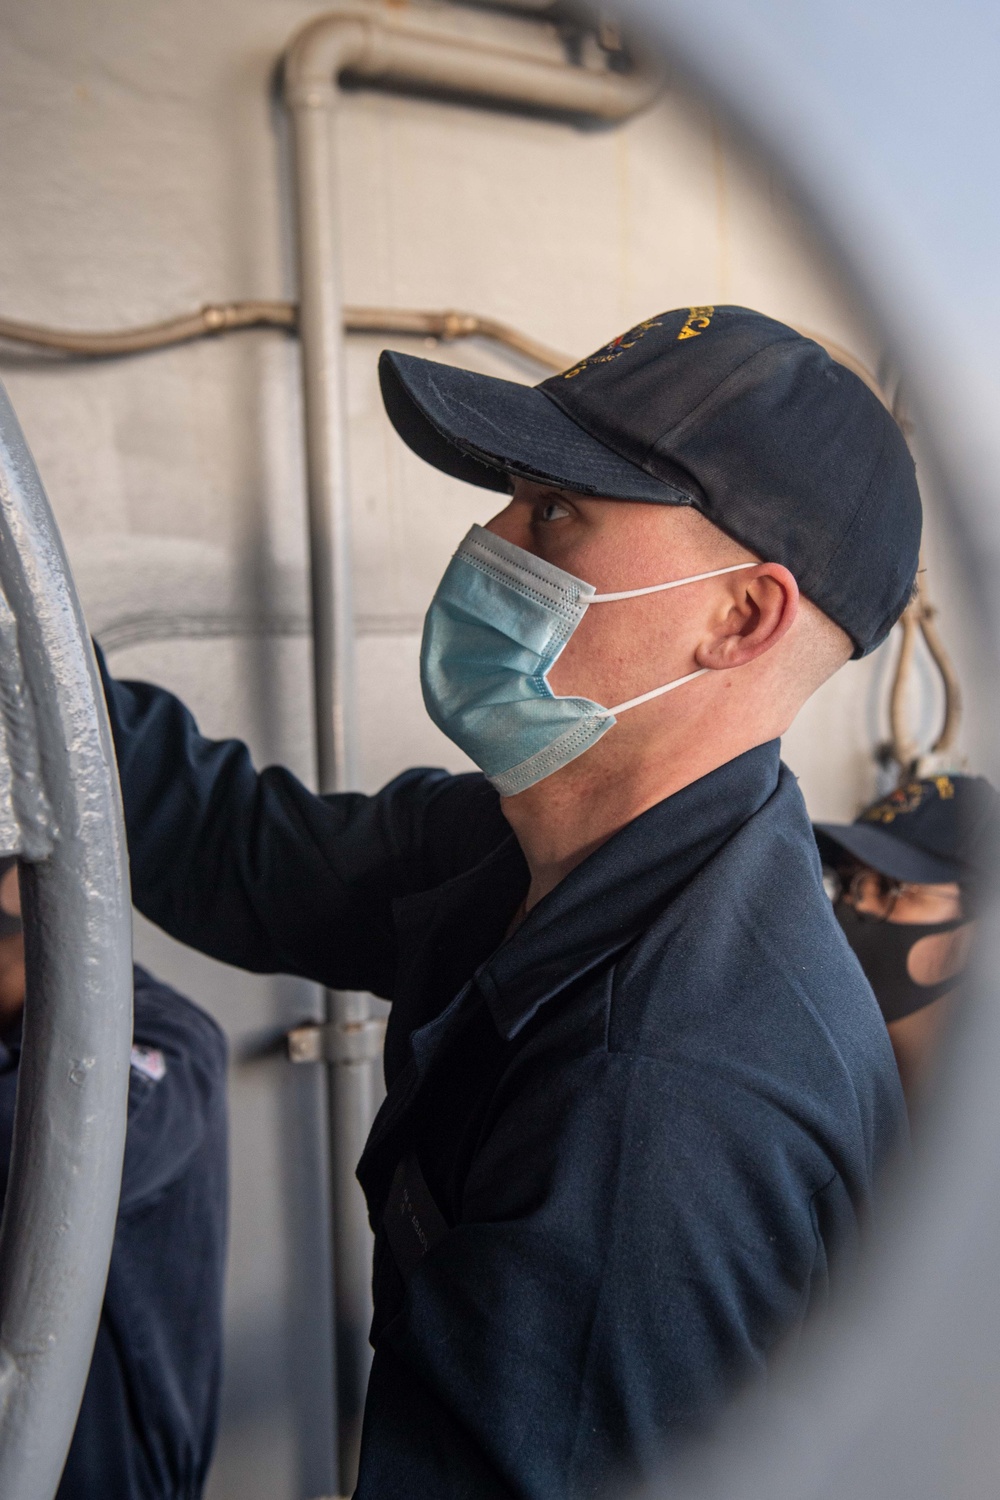 USS America Sailors Conduct Sea and Anchor Detail